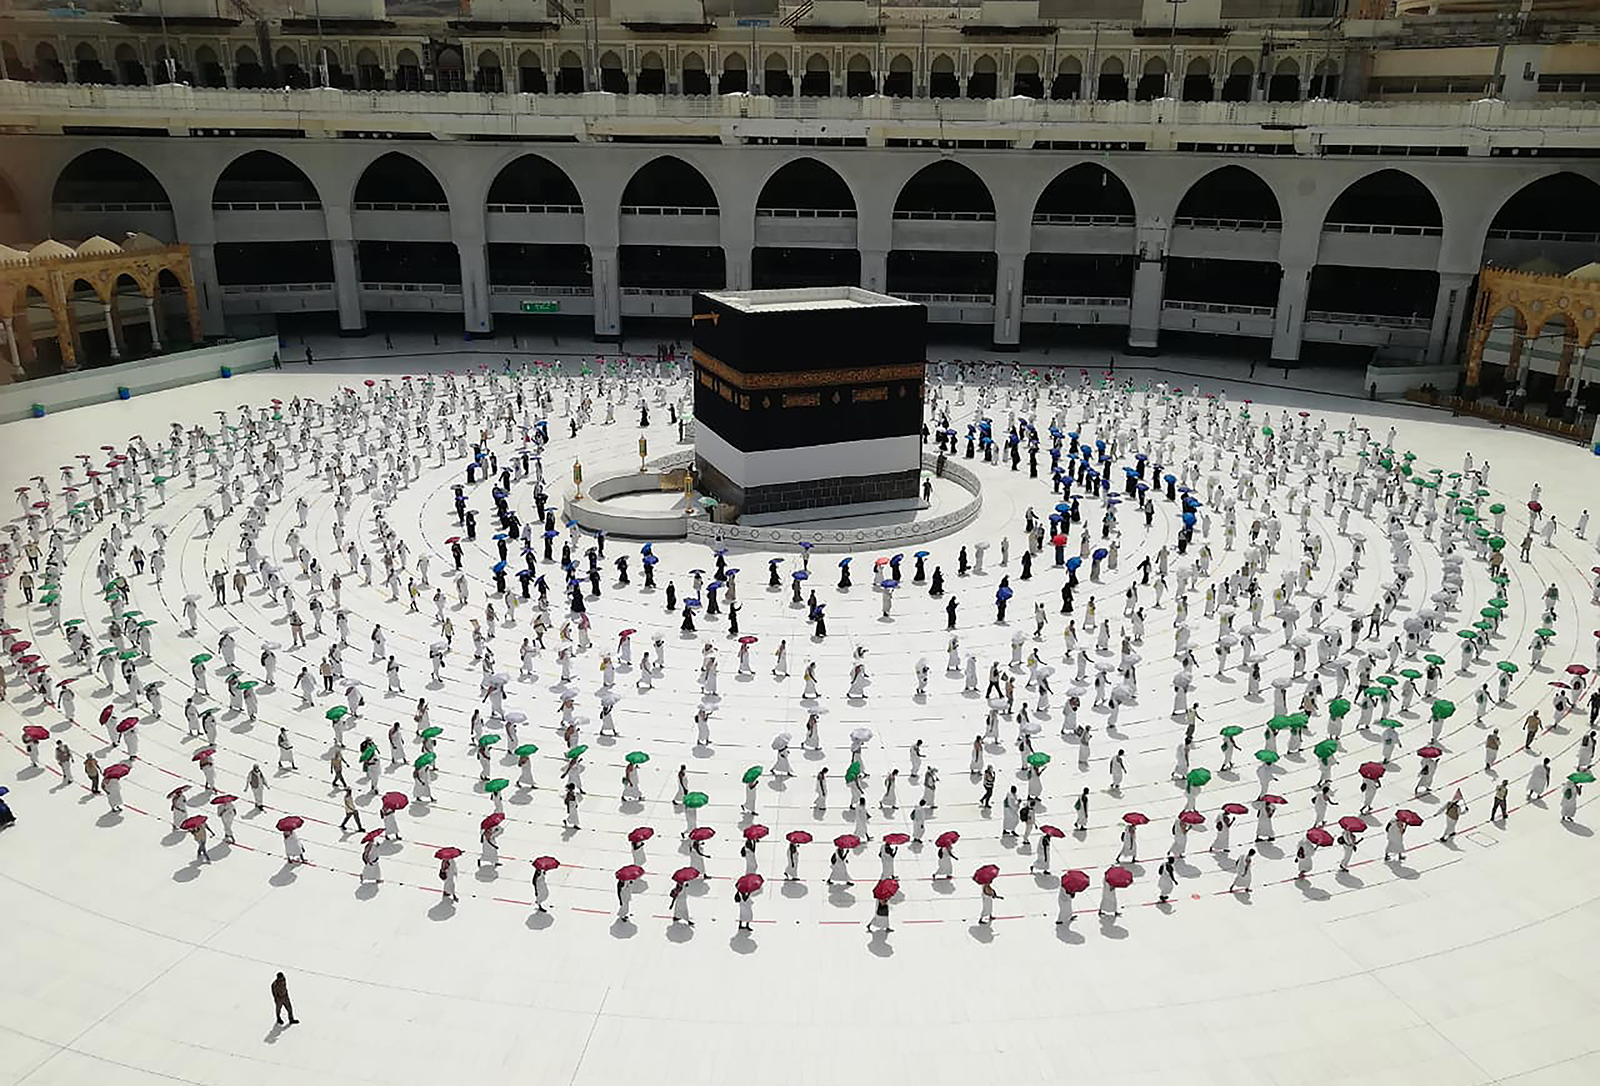 Hundreds of Muslim pilgrims circle the Kaaba, the cubic building at the Grand Mosque, as they observe social distancing to protect against the coronavirus, in the Muslim holy city of Mecca, Saudi Arabia, on July 29, 2020. During the first rites of hajj, Muslims circle the Kaaba counter-clockwise seven times while reciting supplications to God, then walk between two hills where Ibrahim's wife, Hagar, is believed to have run as she searched for water for her dying son before God brought forth a well that runs to this day. (AP Photo)